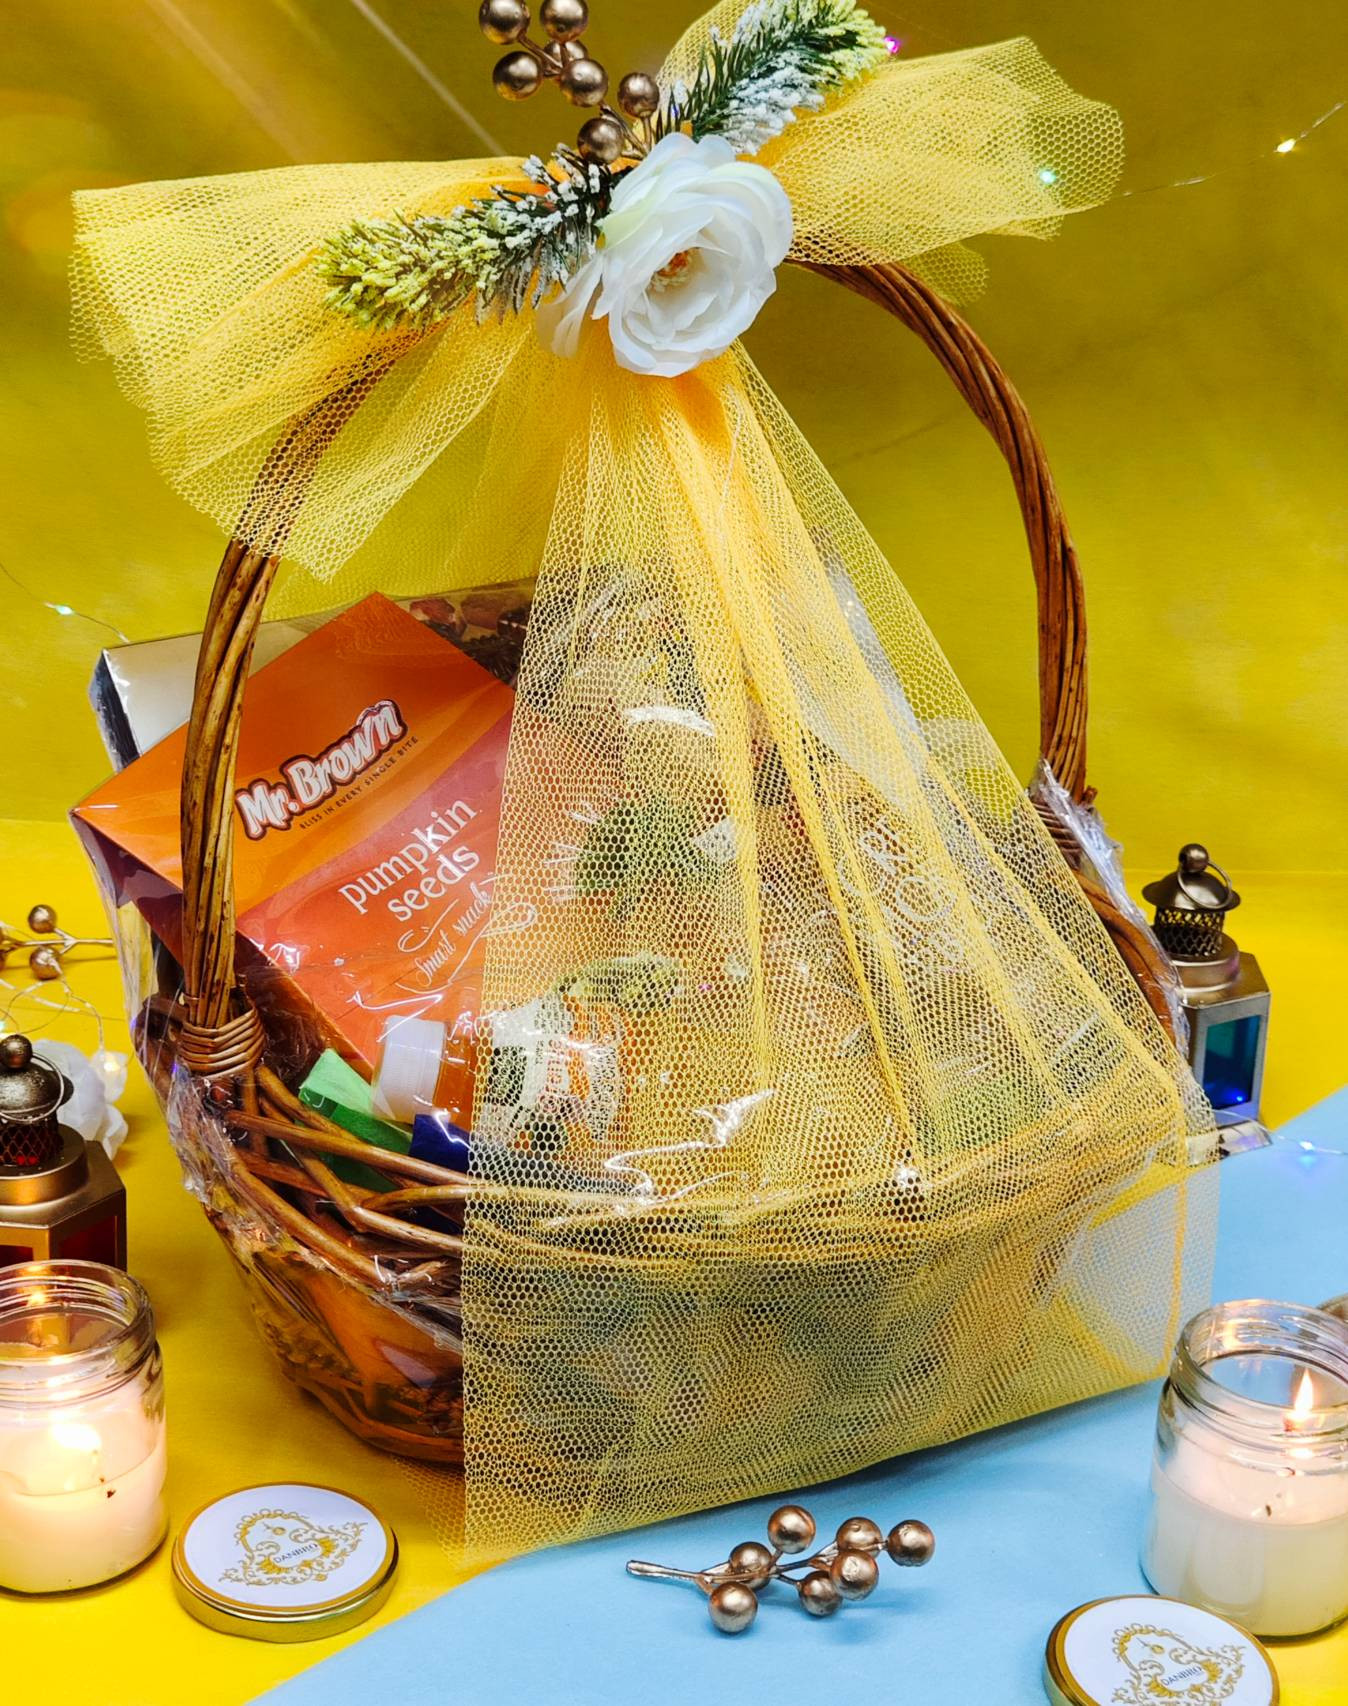 Send Gifts Baskets to India, Gourmet Basket: Low Cost